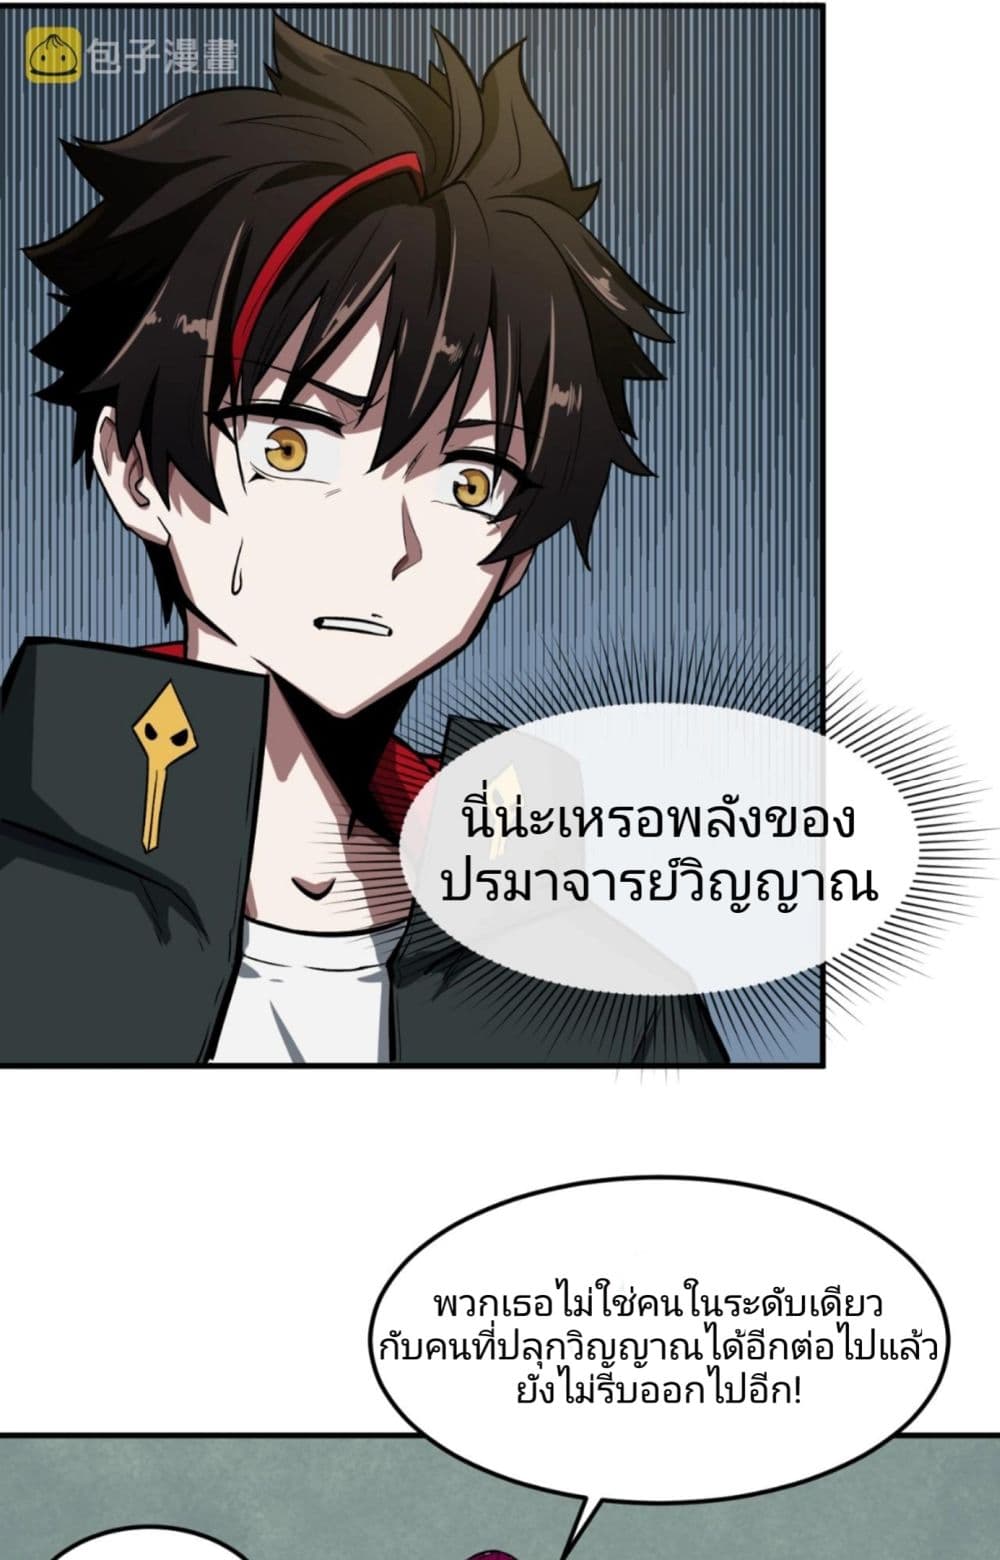 The Age of Ghost Spirits à¸à¸­à¸à¸à¸µà¹ 1 (36)